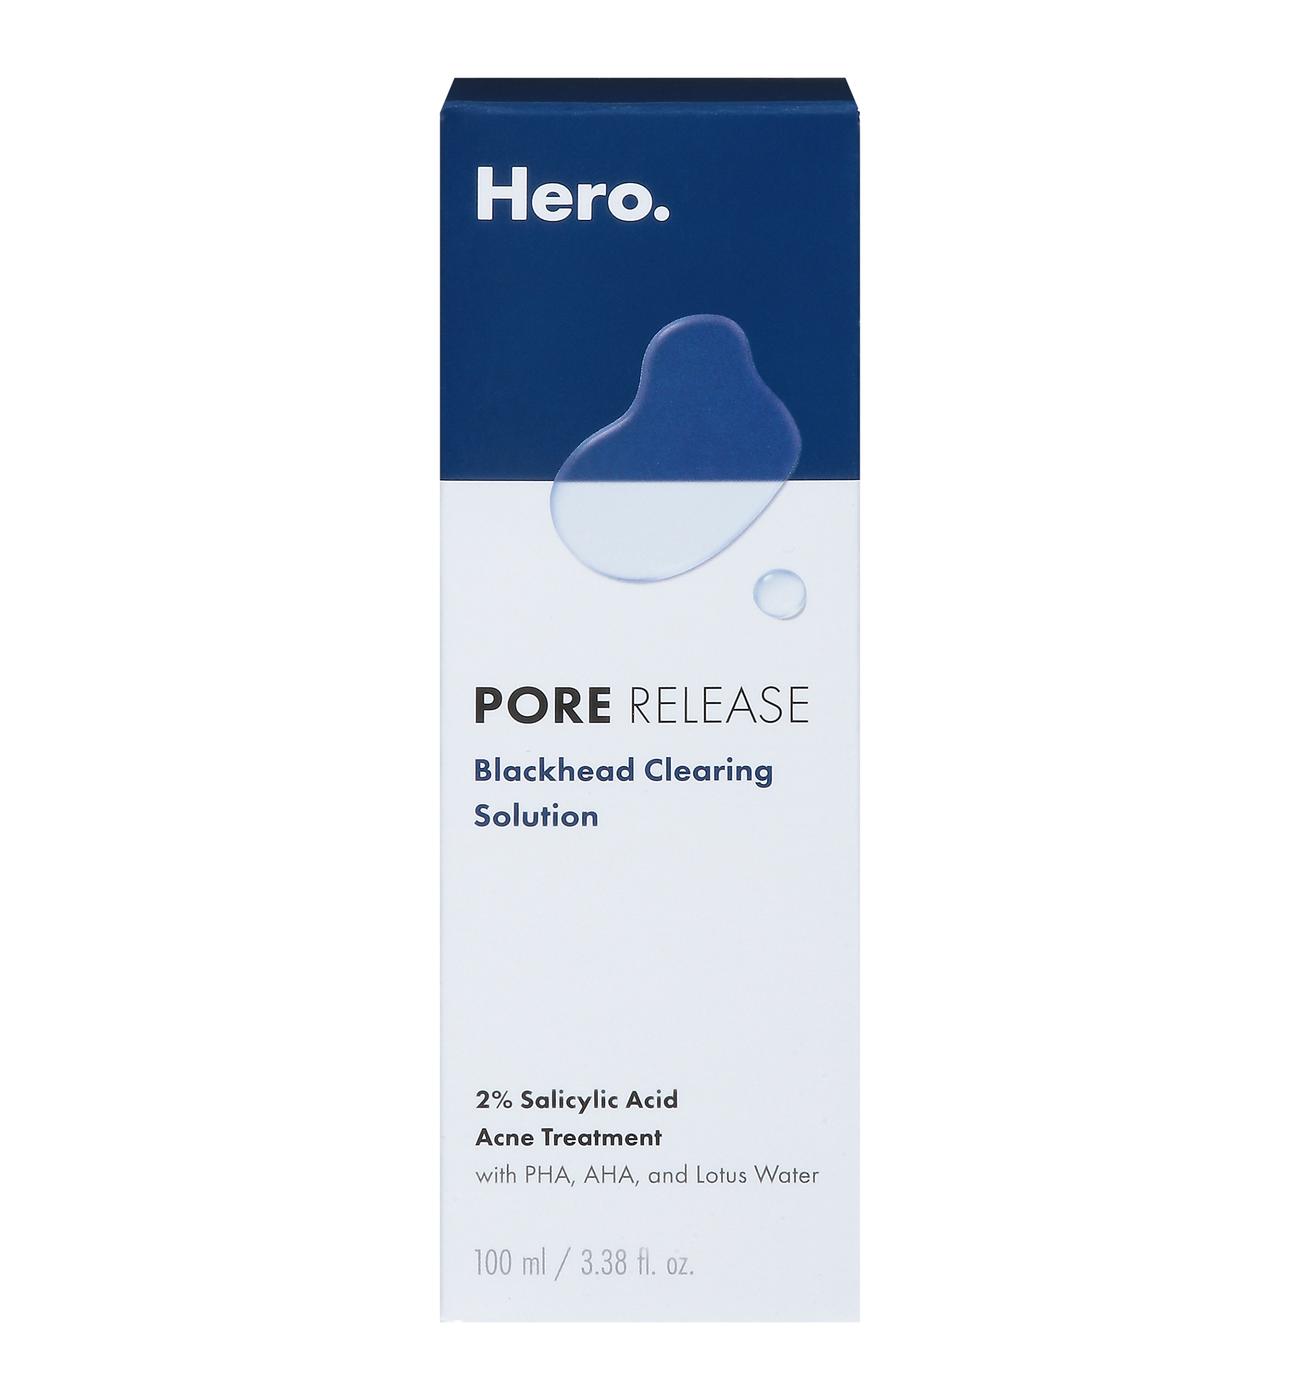 Hero Pore Release Blackhead Clearing Solution; image 1 of 2